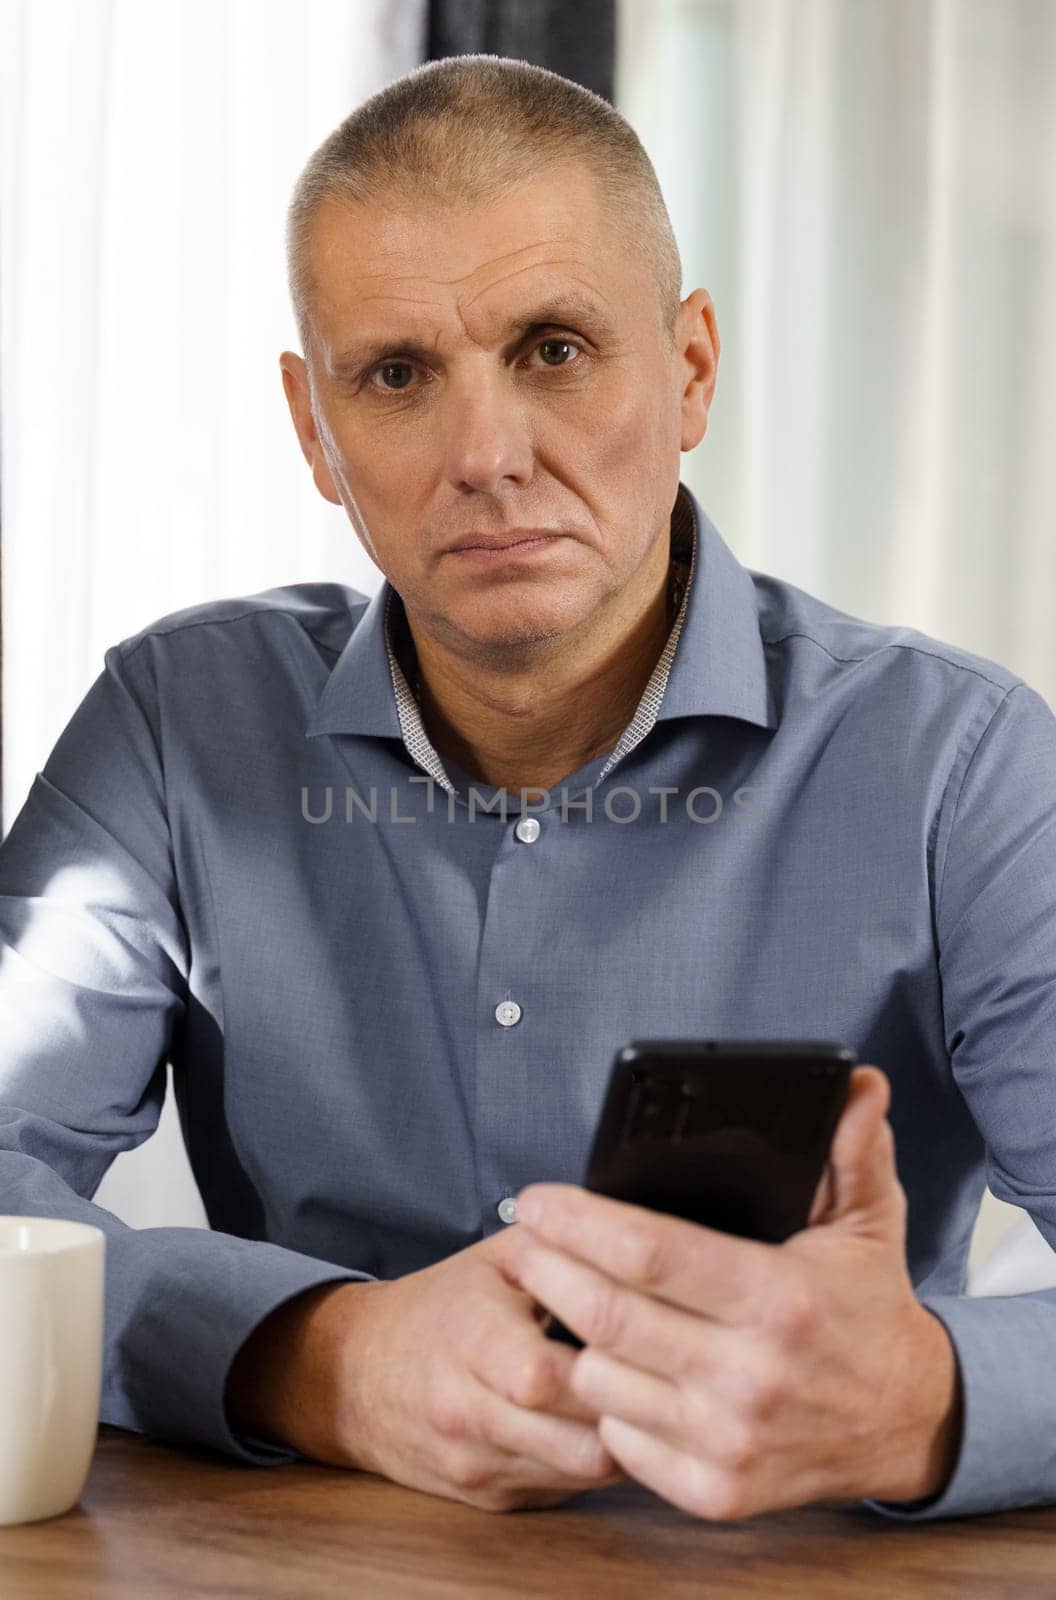 Portrait of a male businessman who sits at a table, holds a phone in his hands, looks into the camera by Sd28DimoN_1976